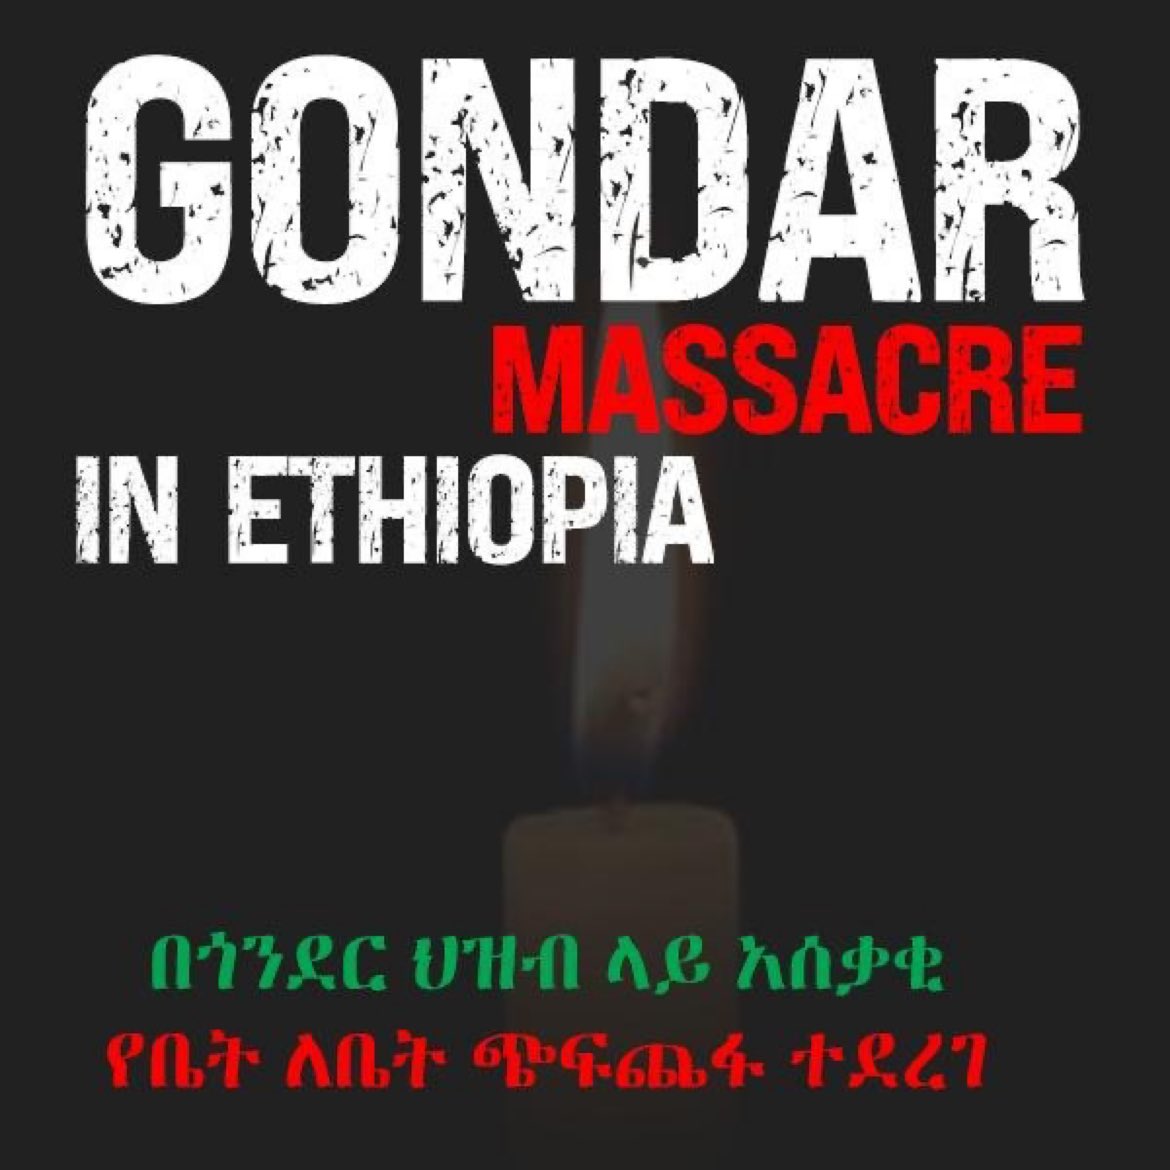 🚨#Ethiopia🇪🇹 :
In Ethiopia's Amhara region, Gondar area Abiy Ahmed's forces slaughtered over 250 innocents Amharas in house-to-house attacks. Internet access has been blocked for a year to conceal the genocide. #AmharaGenocide 

@MikeHammerUSA @EUSR_Koopmans @USEmbassyAddis